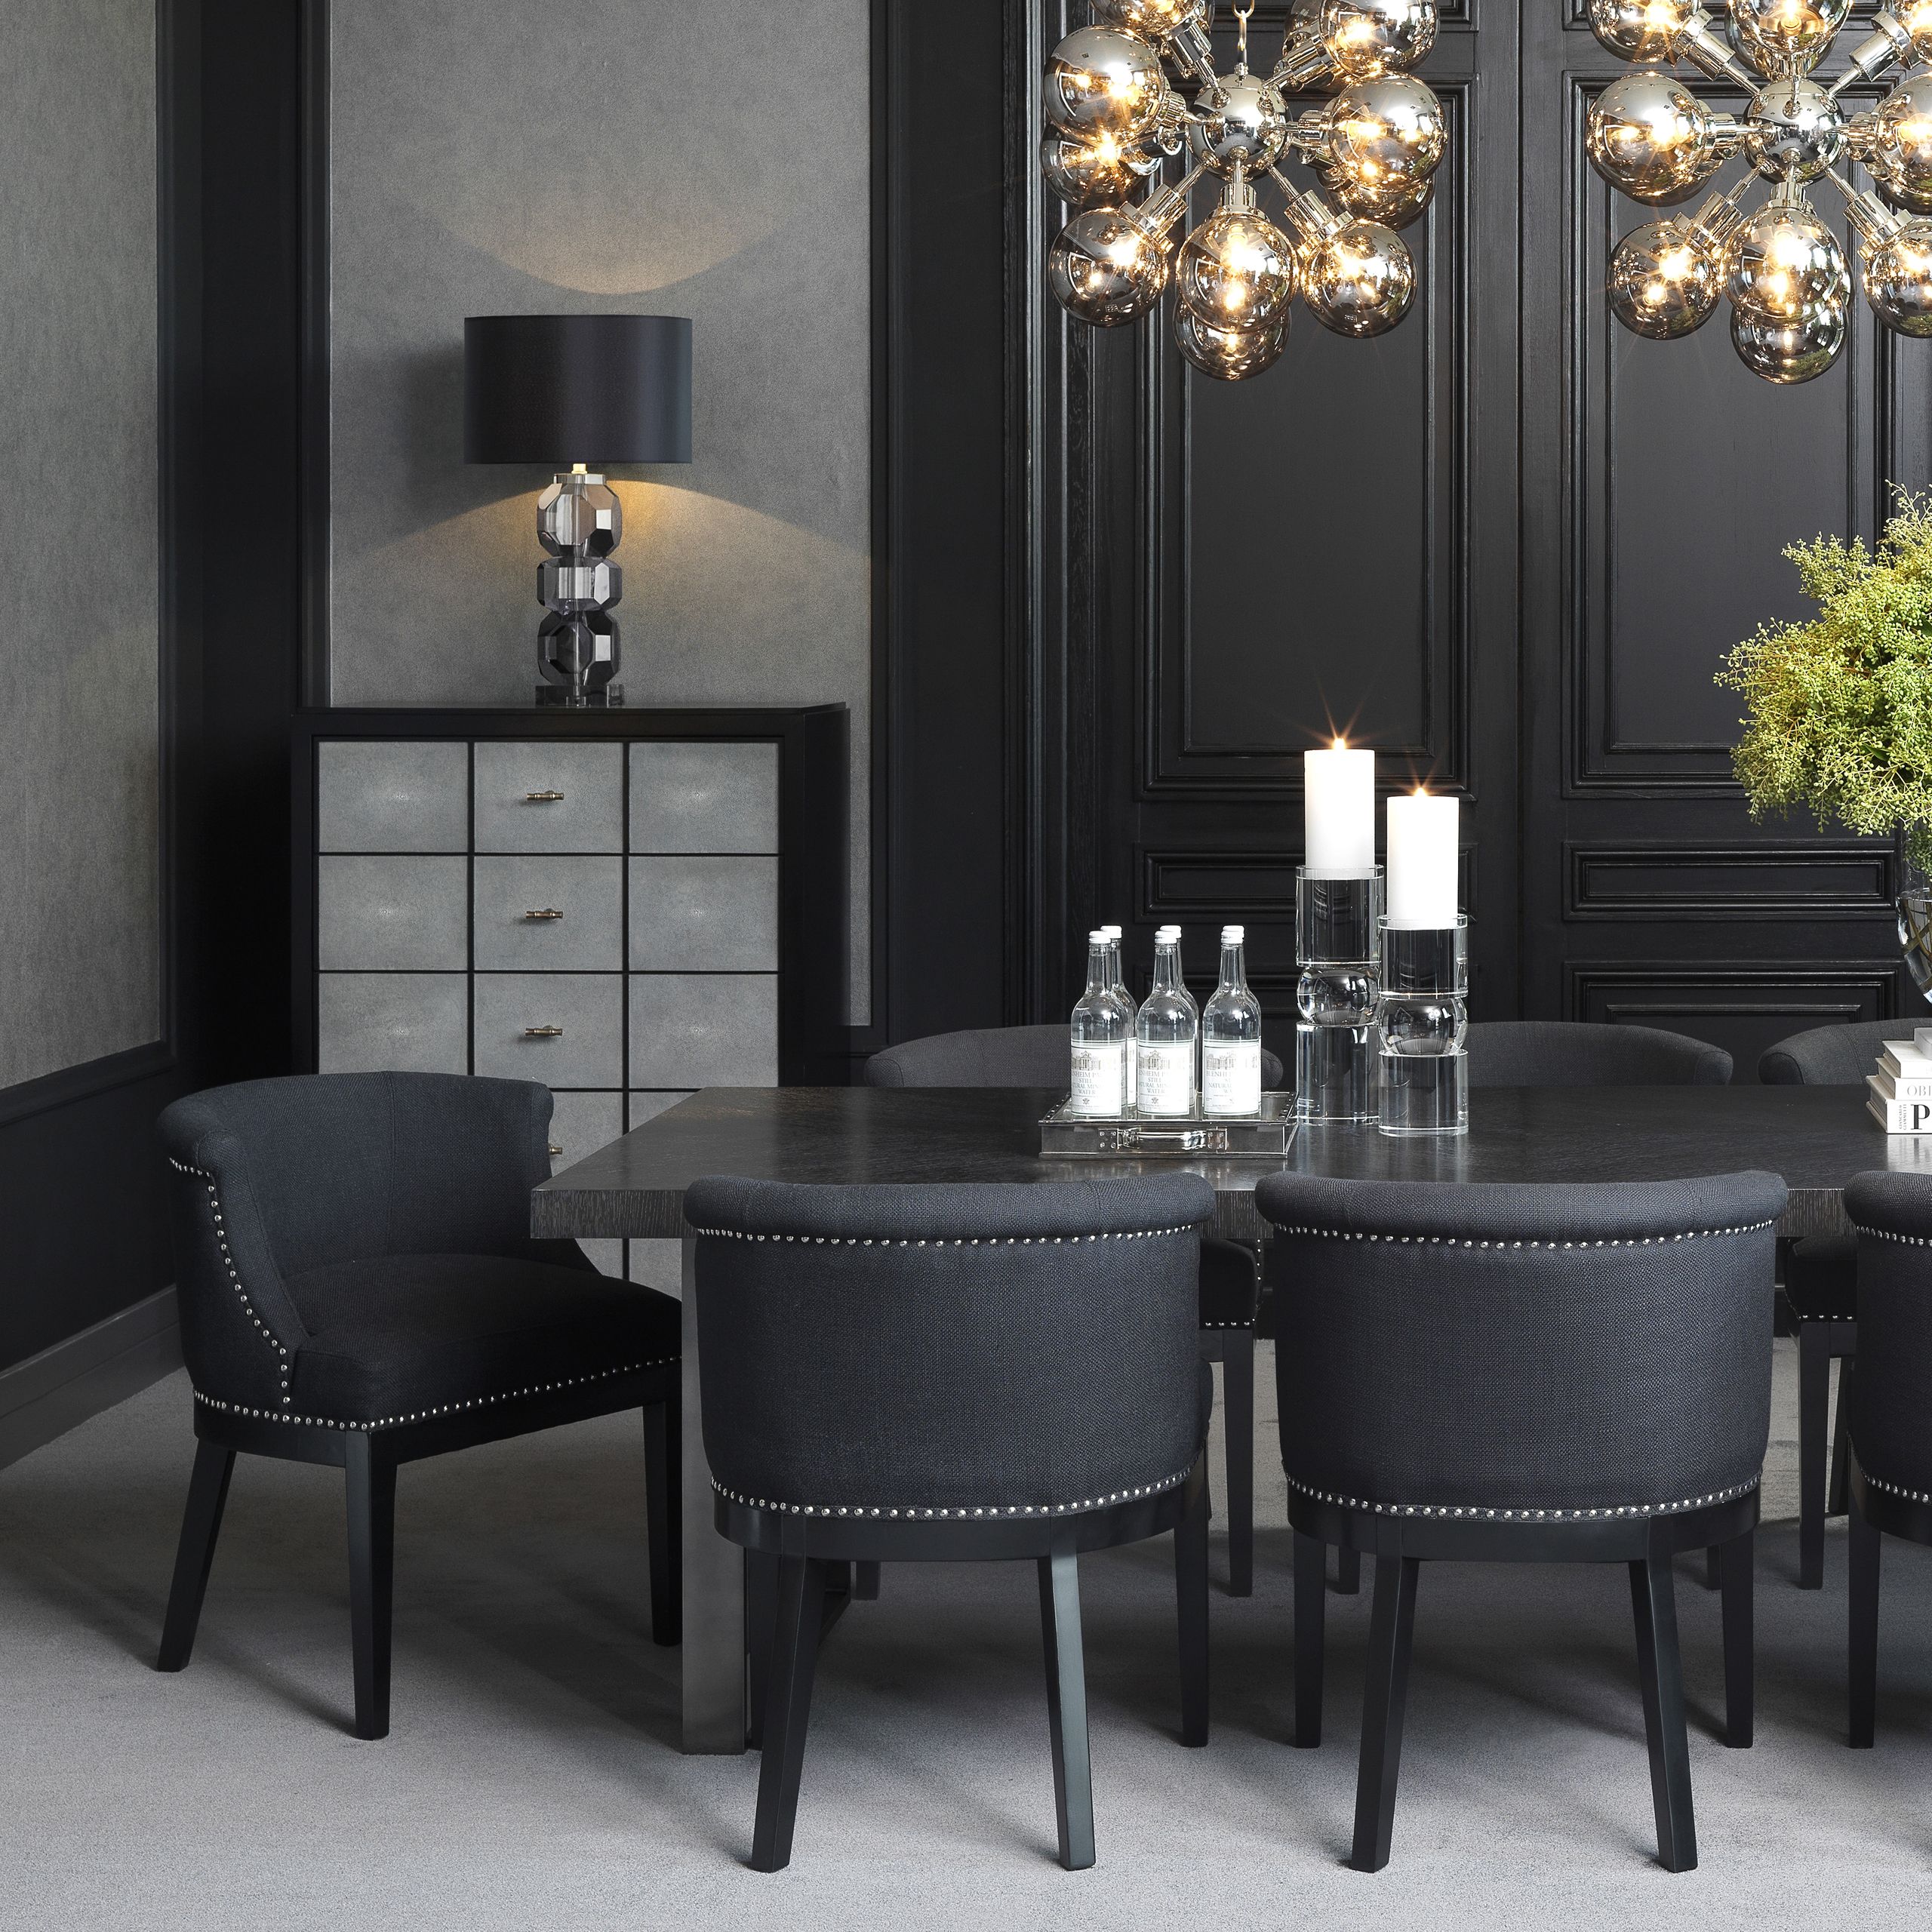 Boca Grande Black Dining Chair, Chairs For Dining Table Black